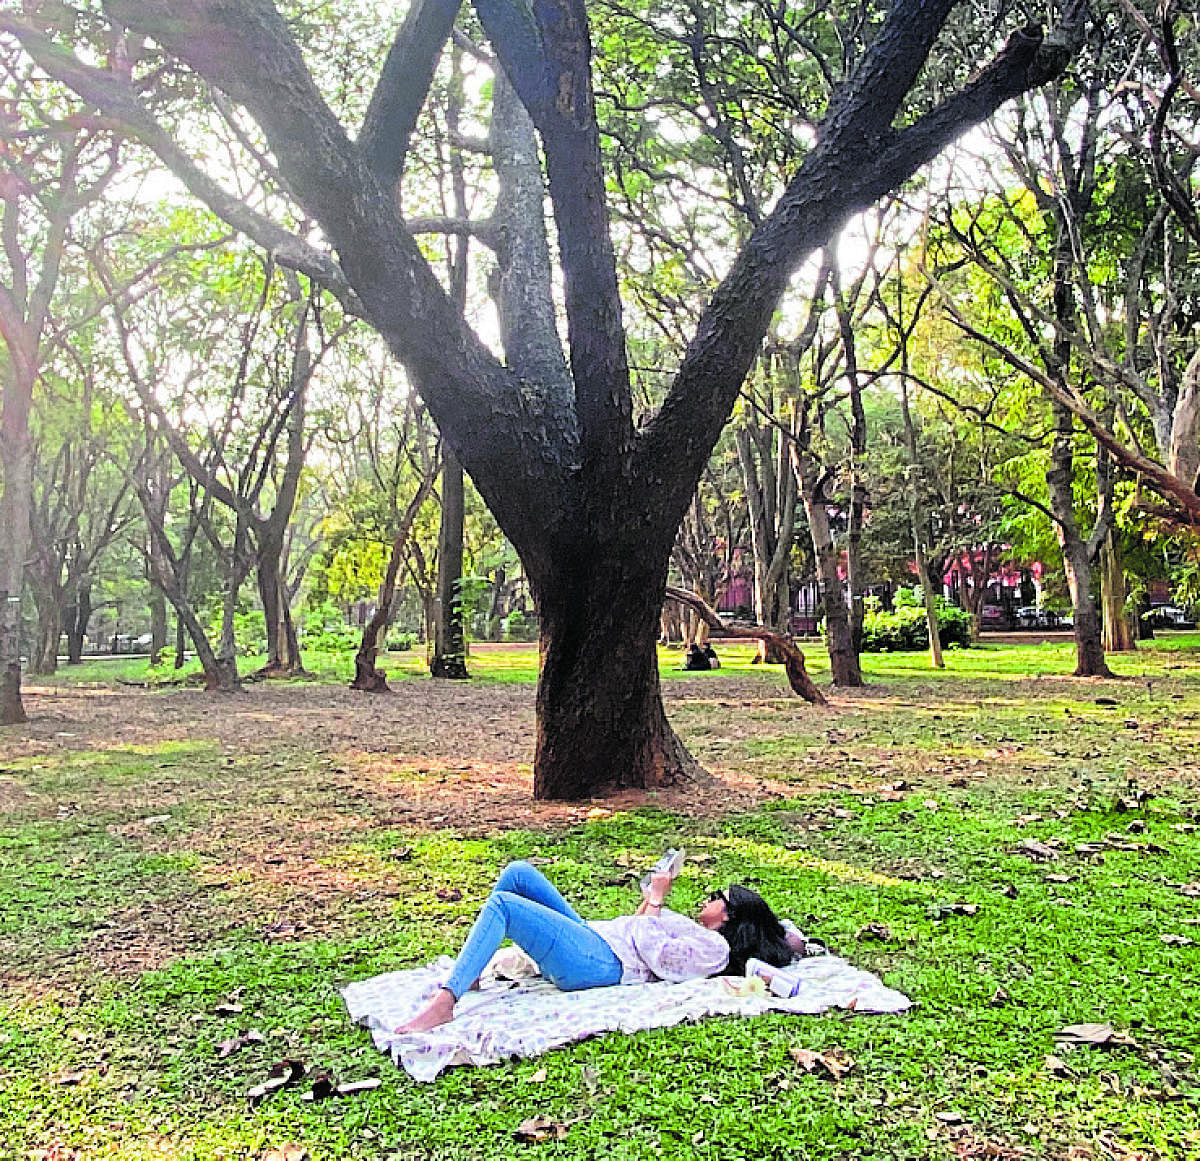 Minutes before the reporter fell asleep in Cubbon Park. Credit: DH Photo